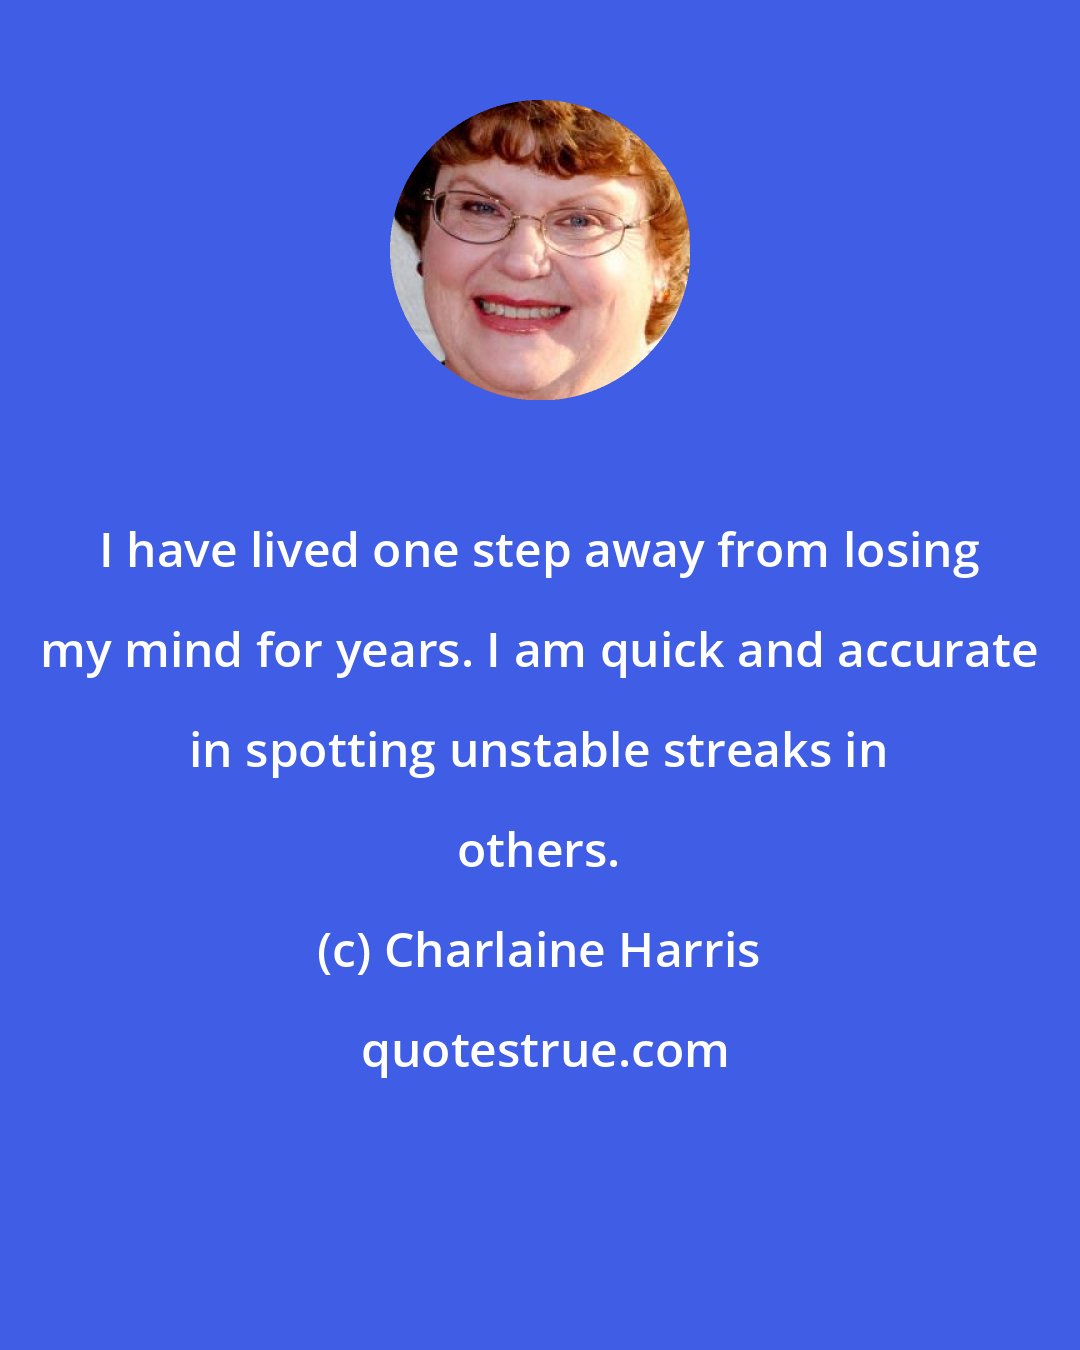 Charlaine Harris: I have lived one step away from losing my mind for years. I am quick and accurate in spotting unstable streaks in others.